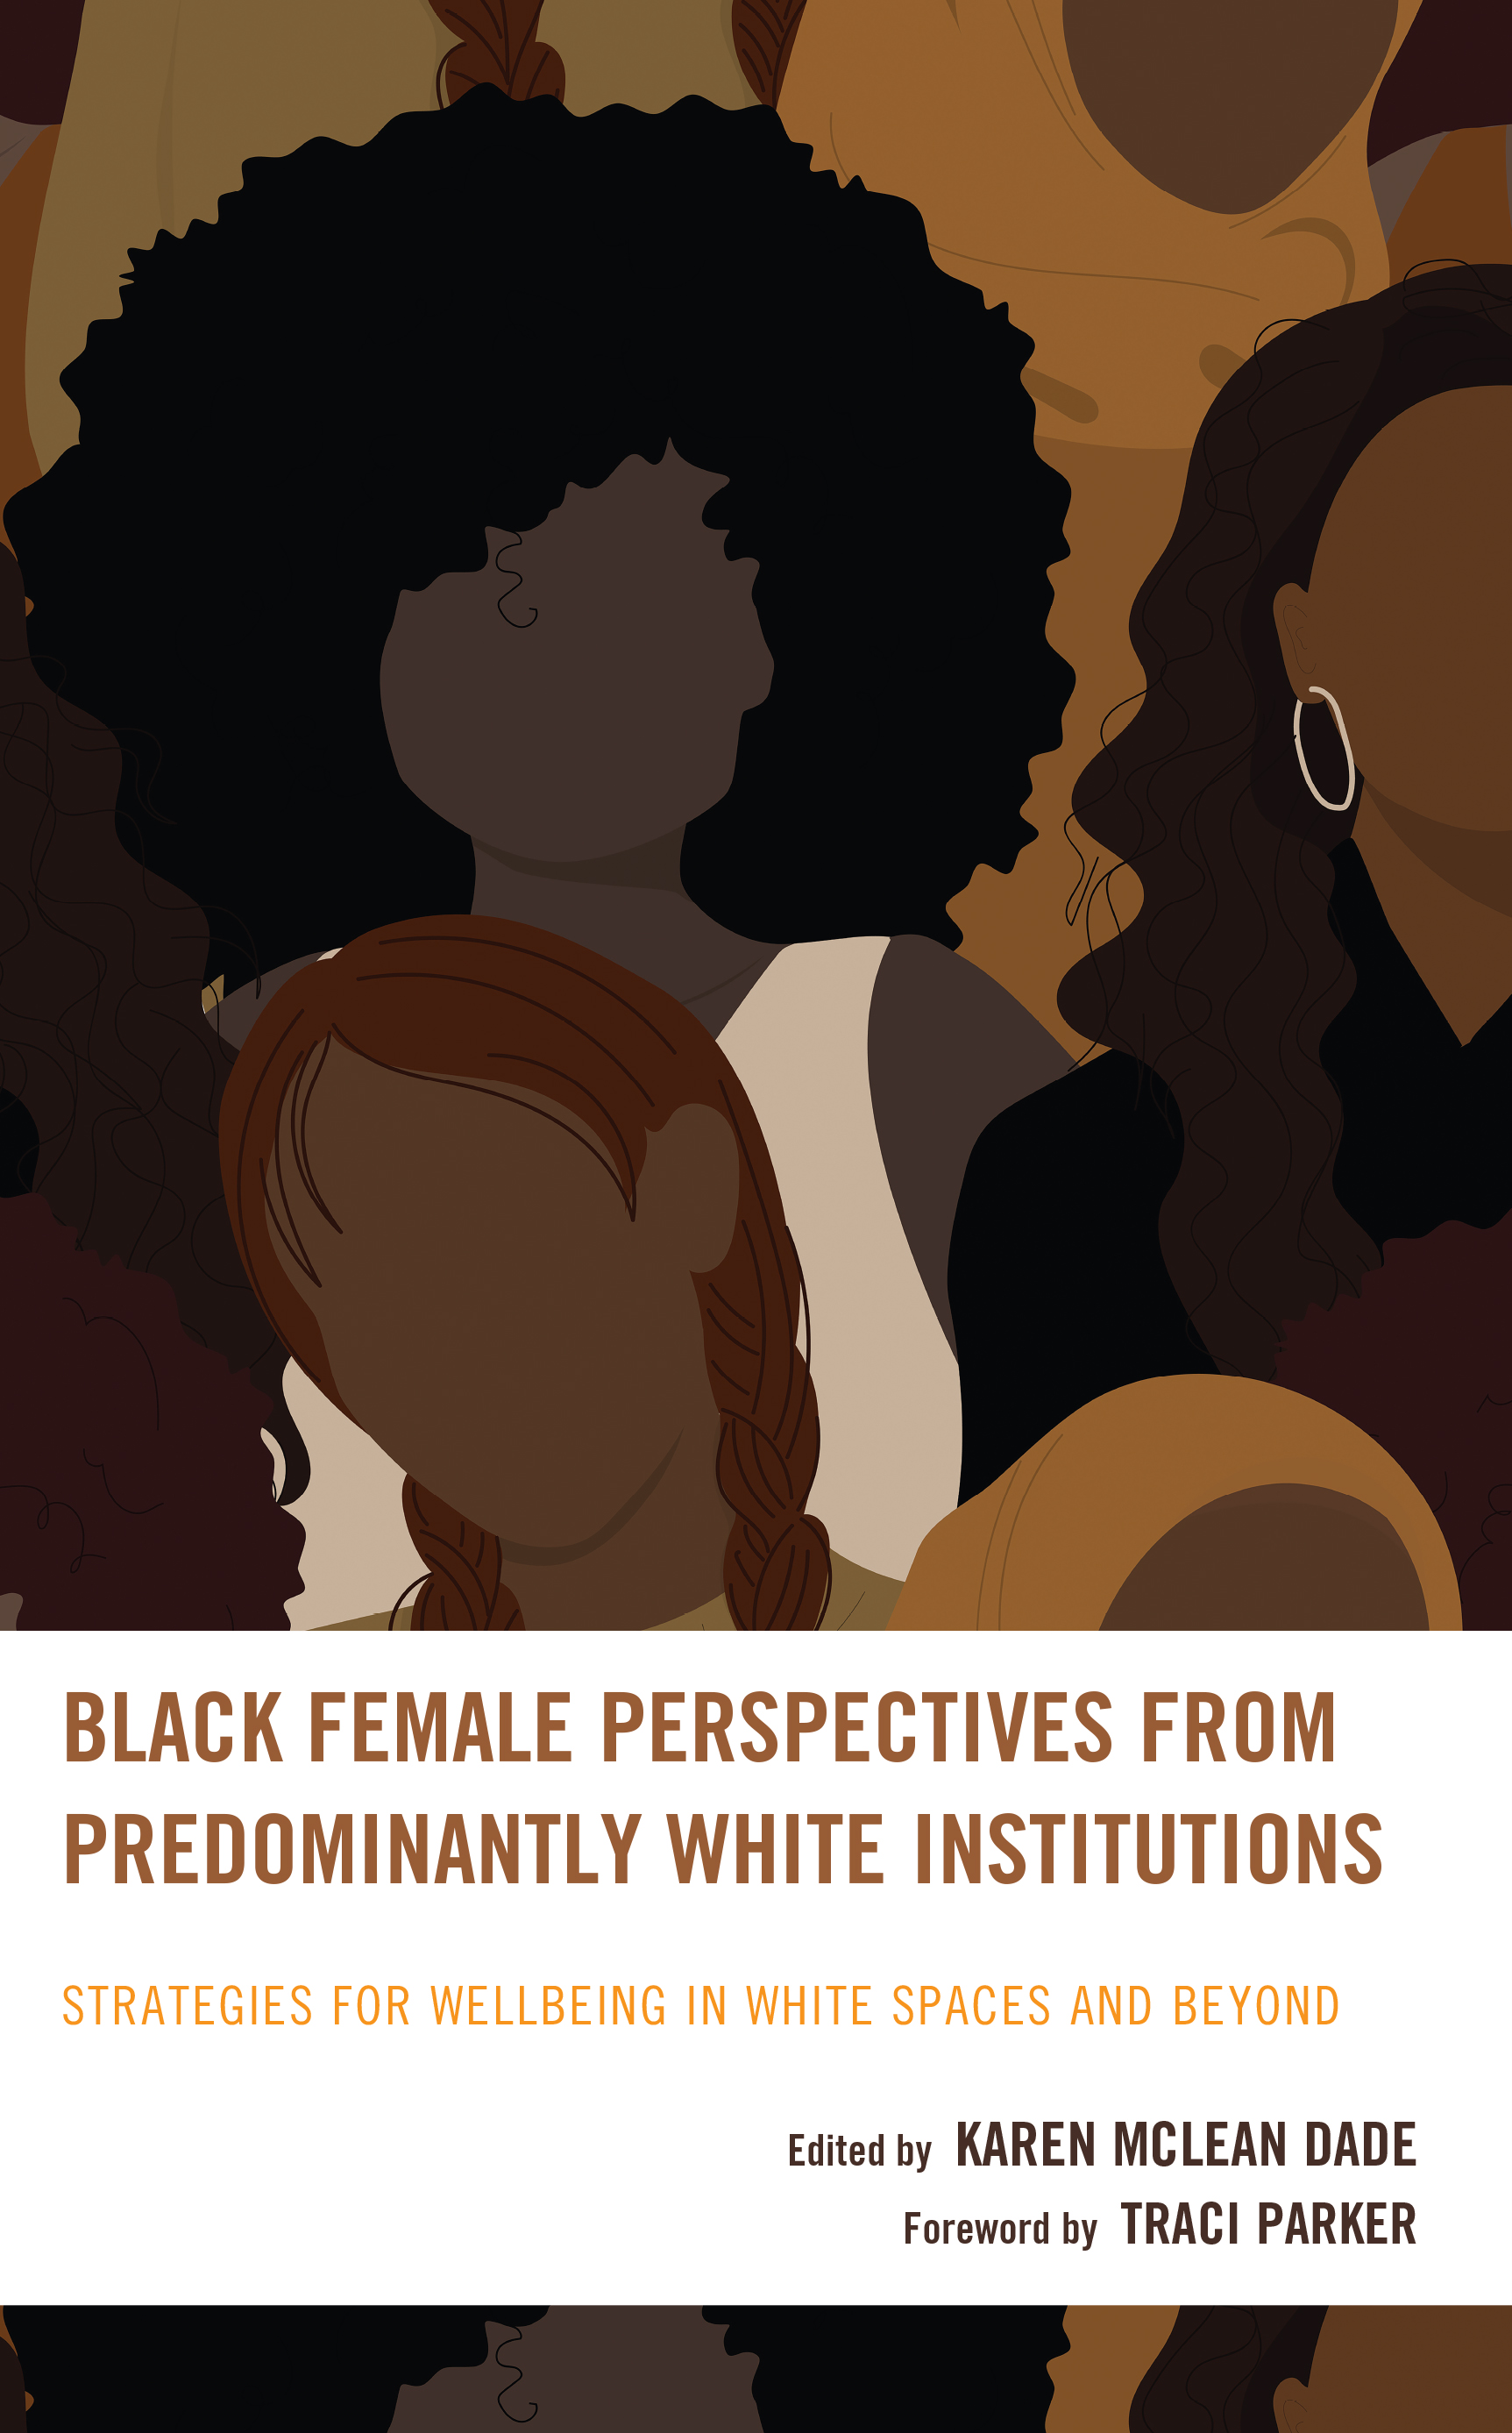 Black Female Perspectives from Predominantly White Institutions: Strategies for Wellbeing in White Spaces and Beyond